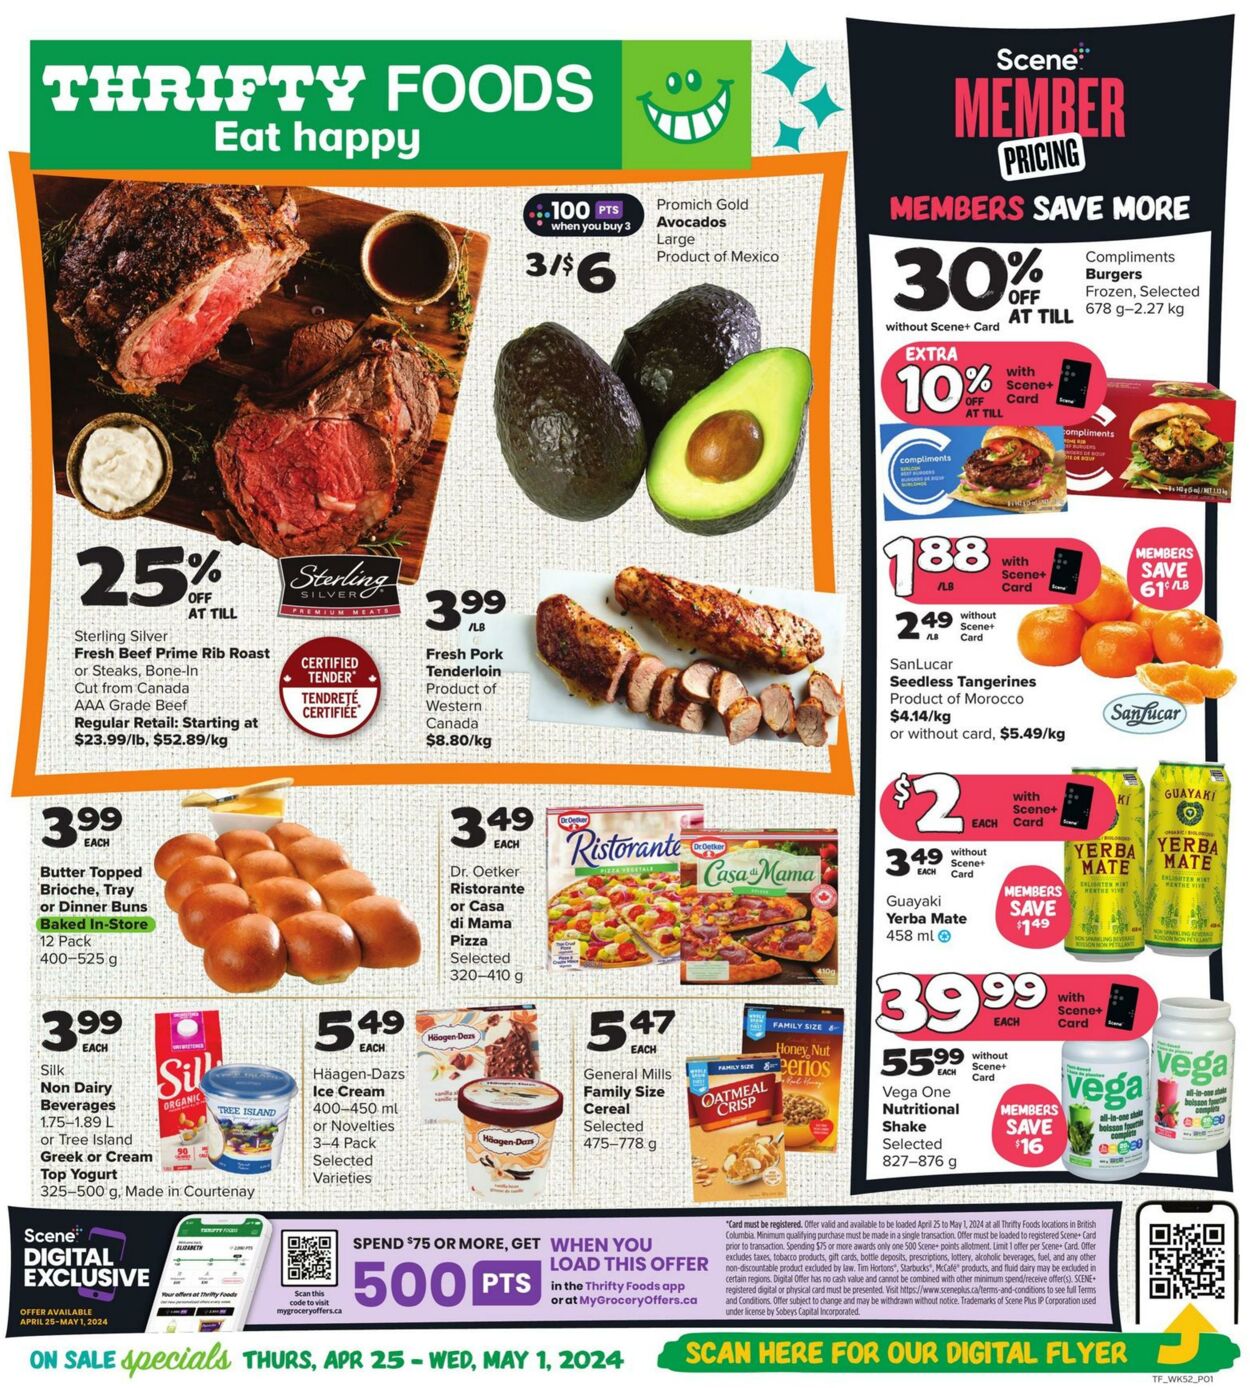 Thrifty Foods Circulaires